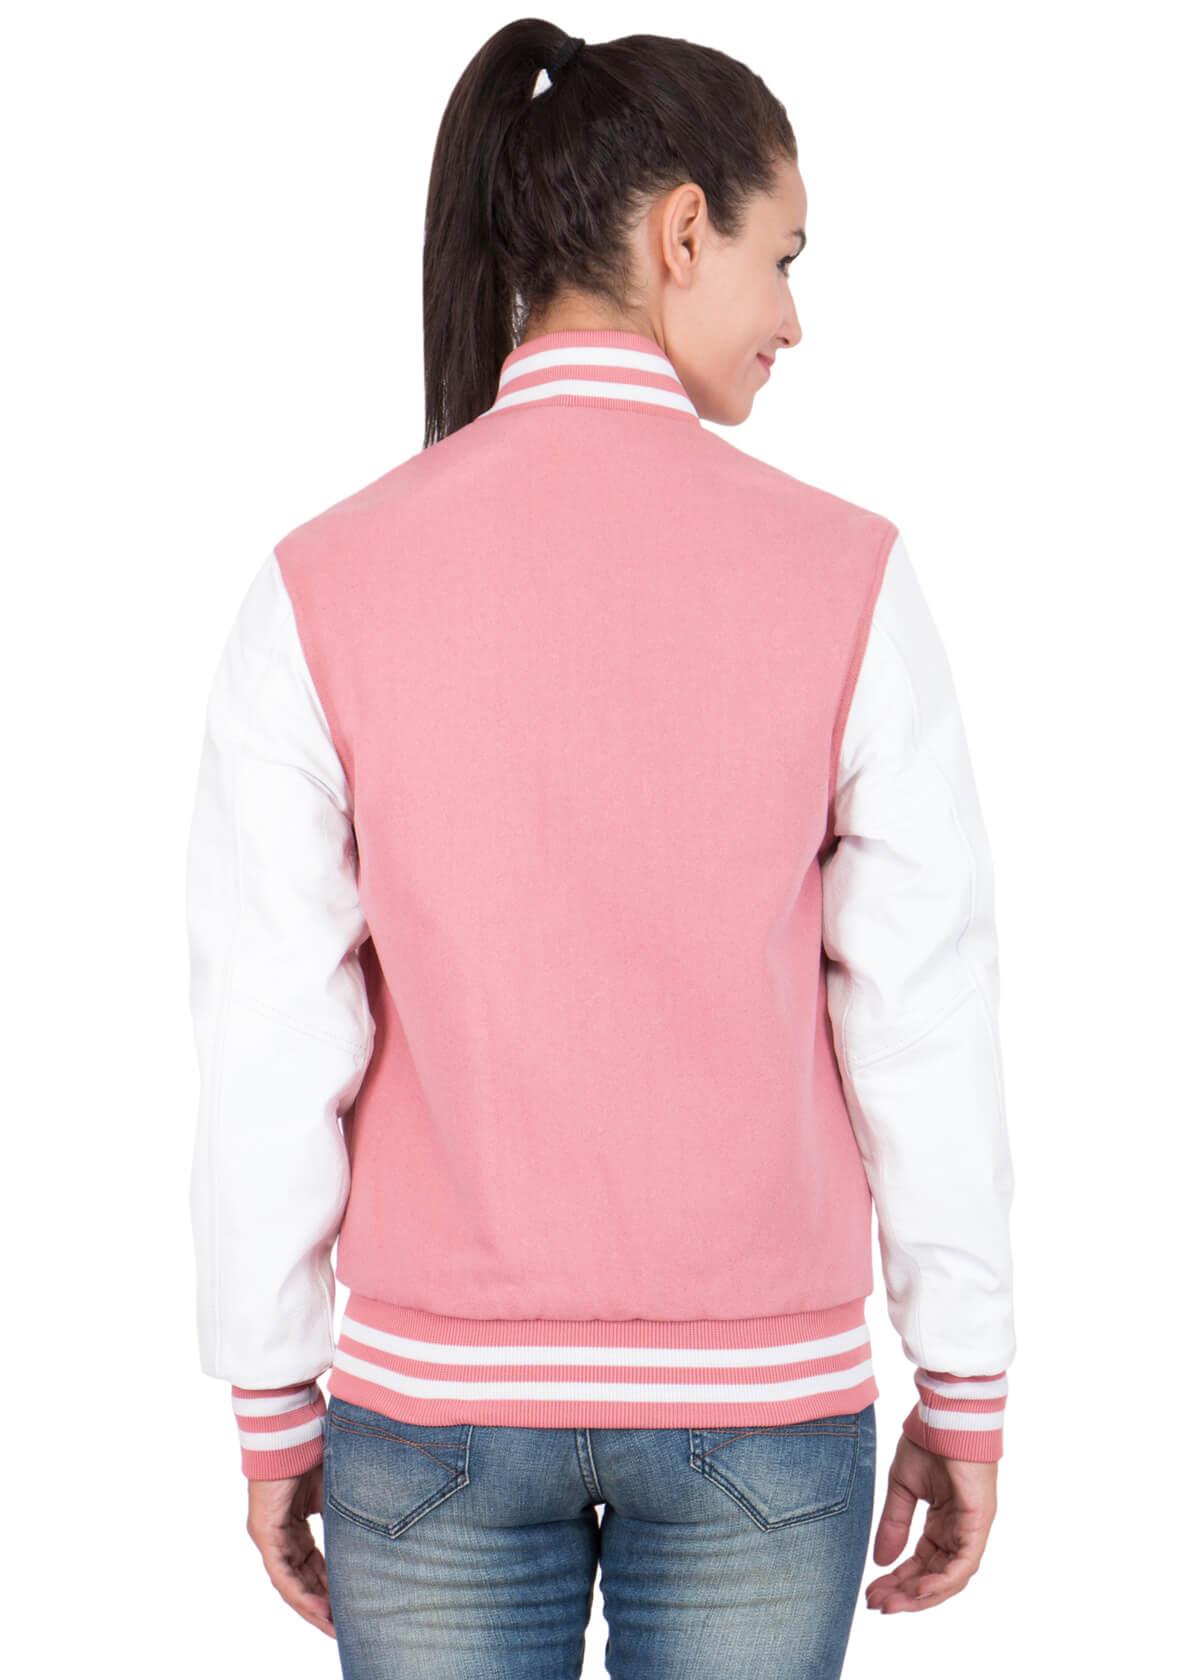 Pink Varsity Jacket Womens with White Leather Sleeves-5